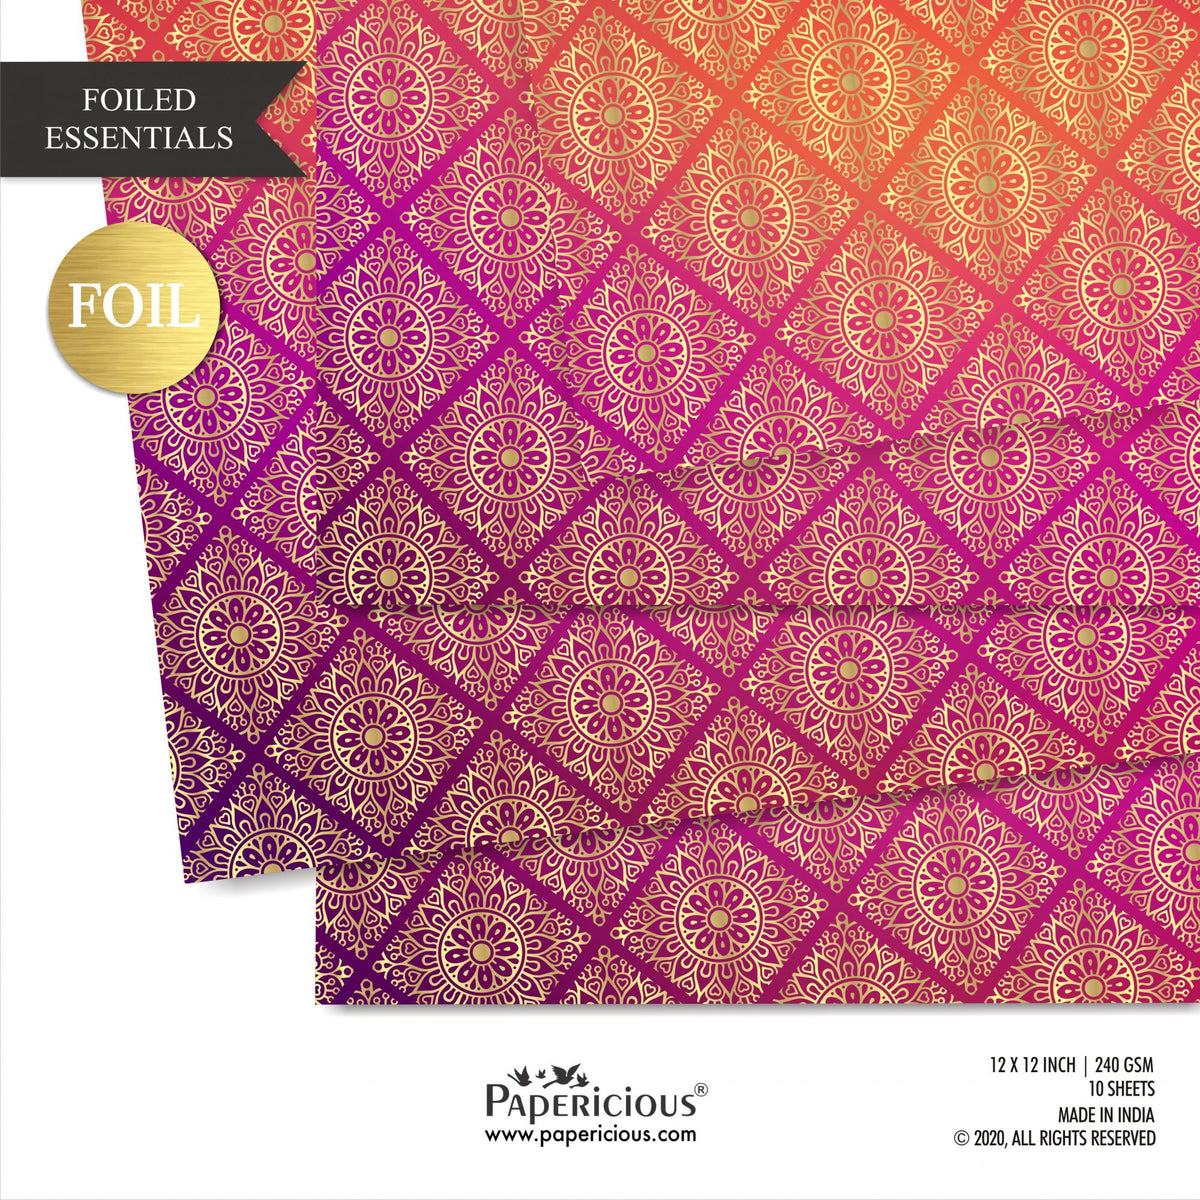 Papericious - Golden Foiled Pattern Scrapbook Papers 12x12 inch / 10 sheets / #12512